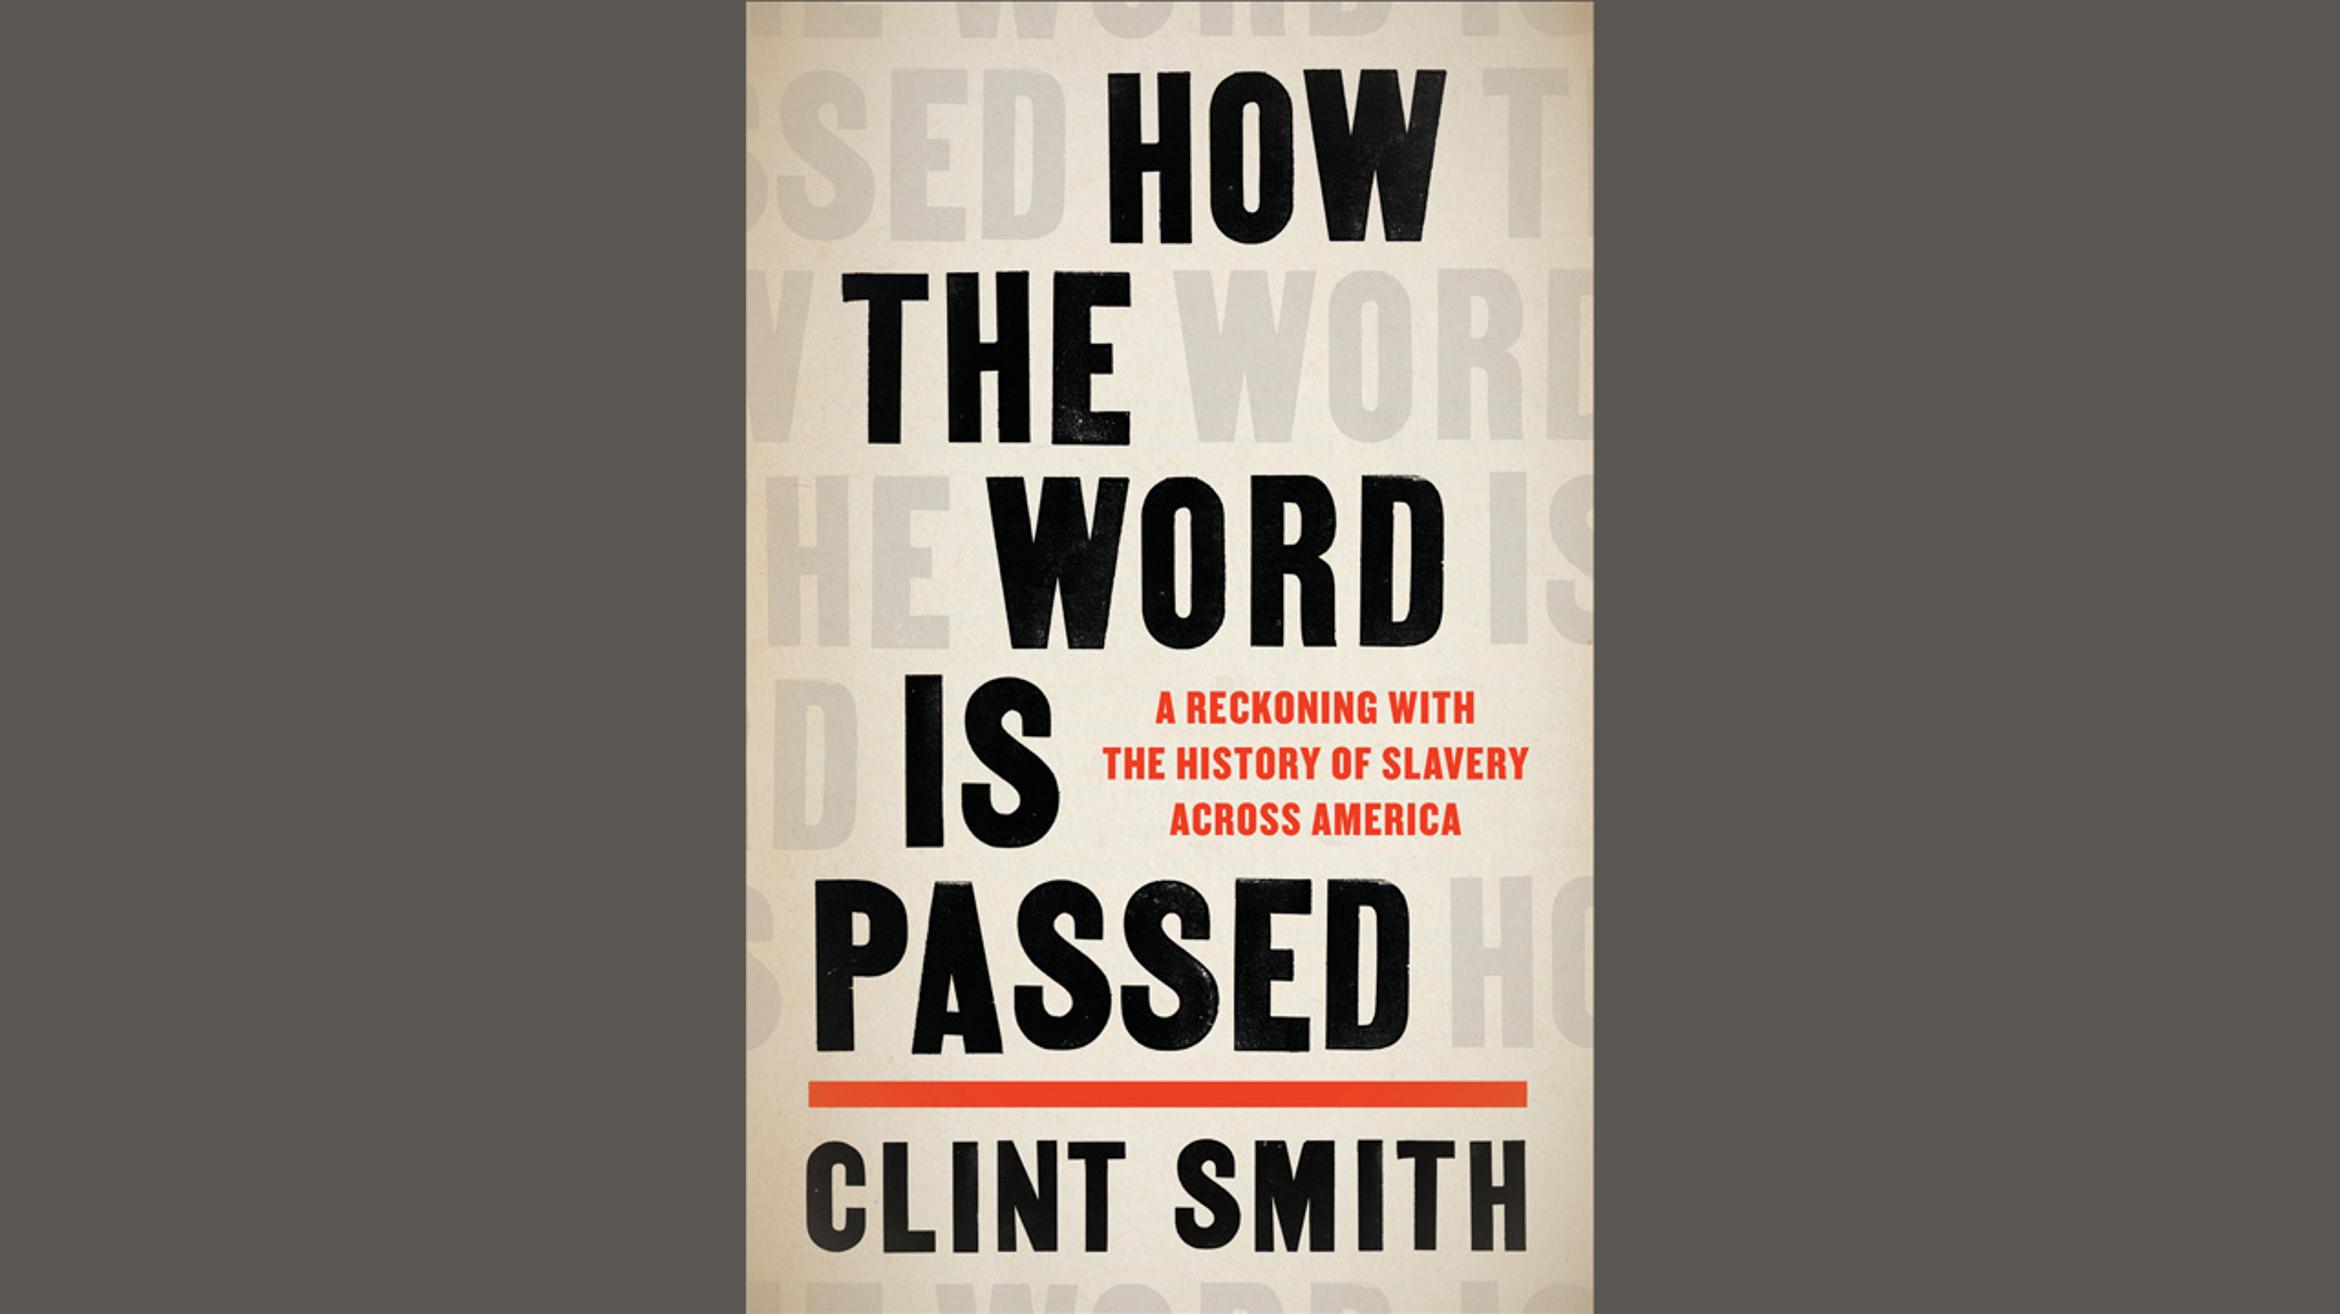 Author Clint Smith’s New Book “How the Word Is Passed” Interrogates America’s History of Slavery